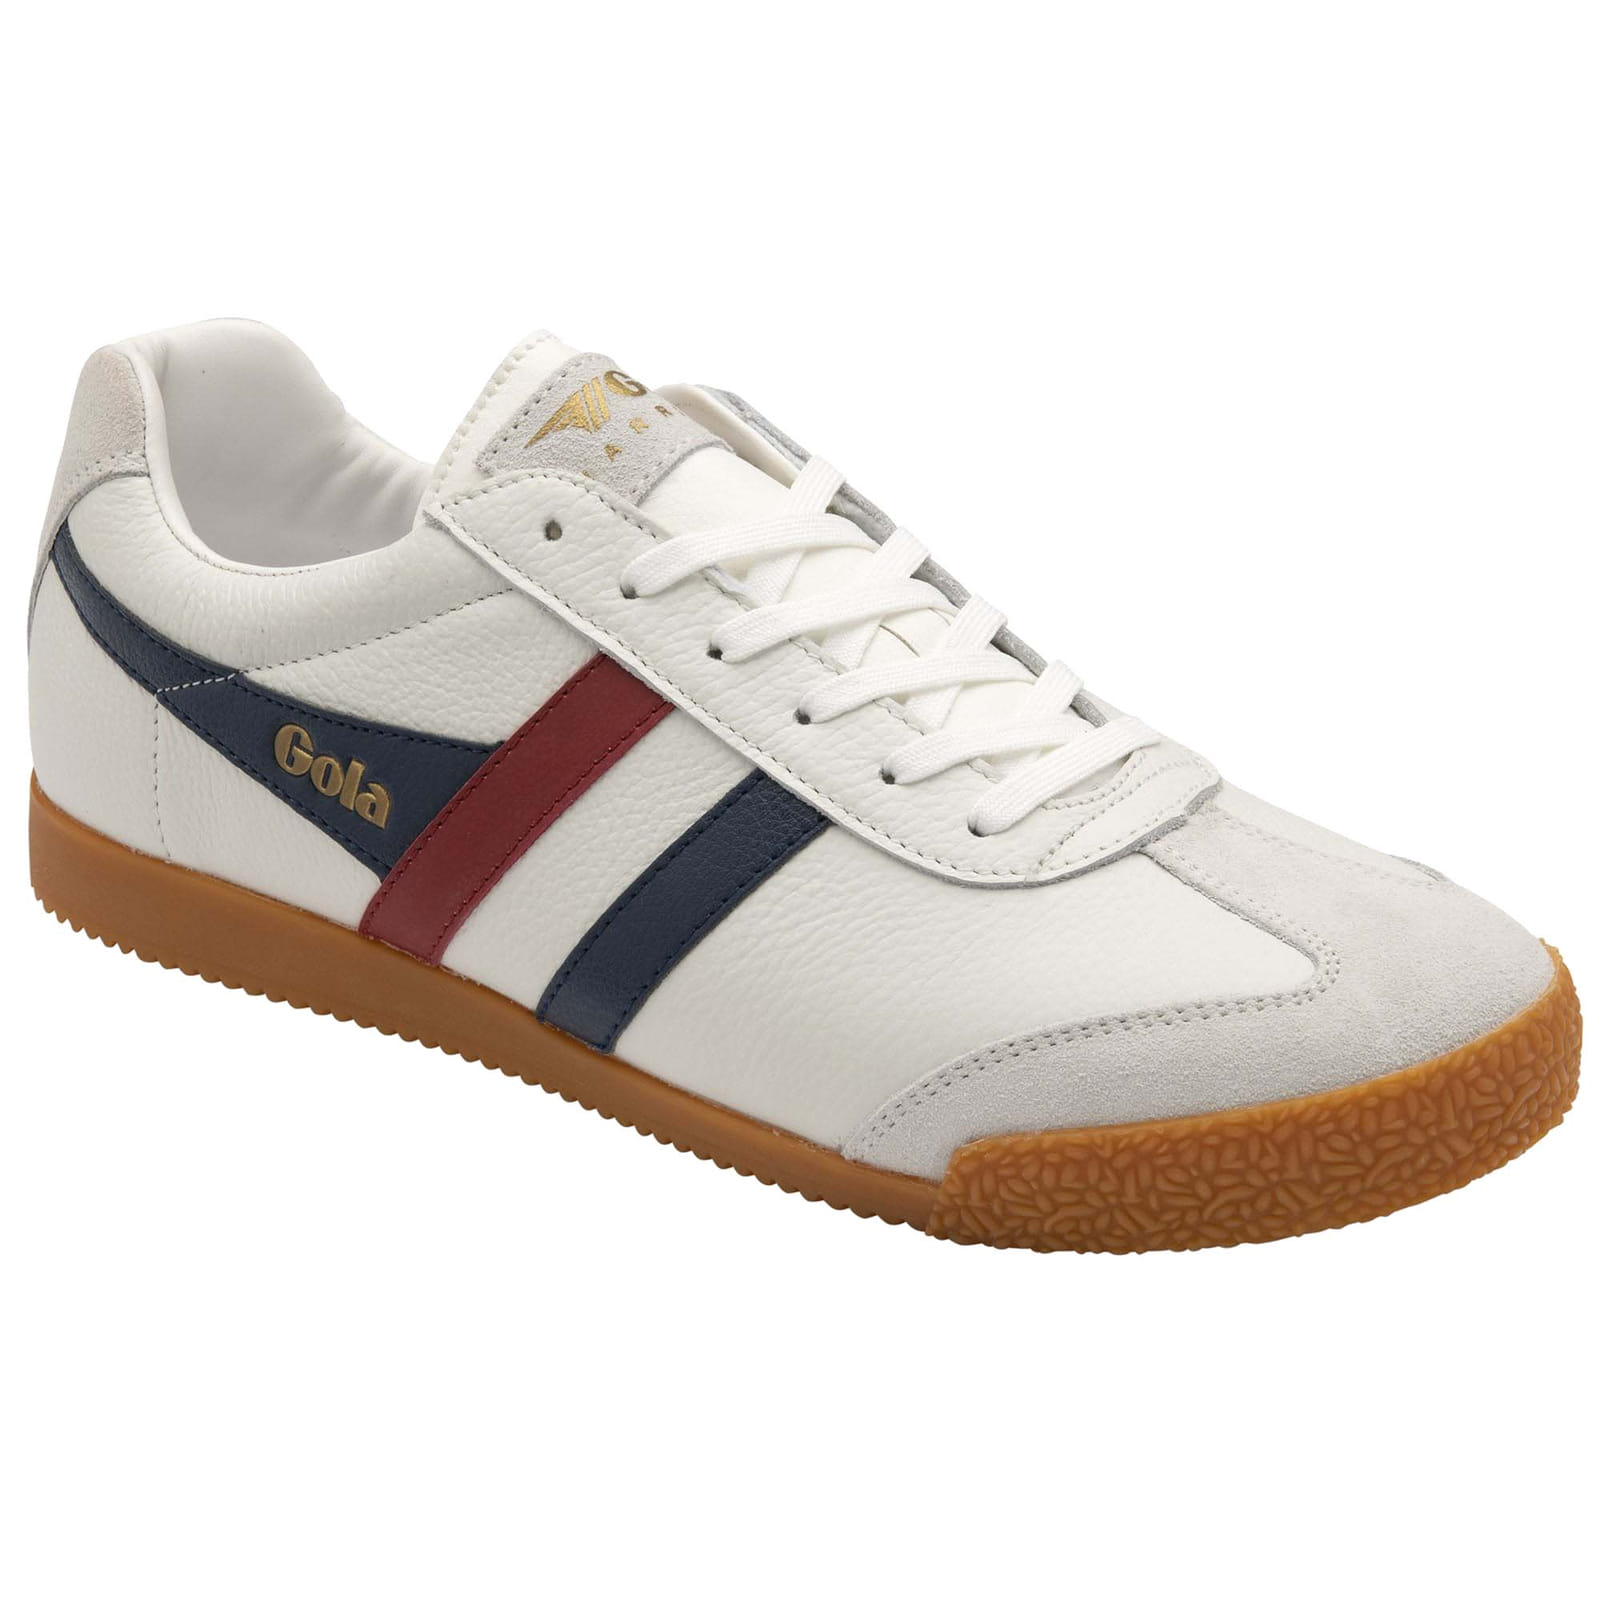 Gola Men's Harrier Leather Trainers Shoes - UK 9